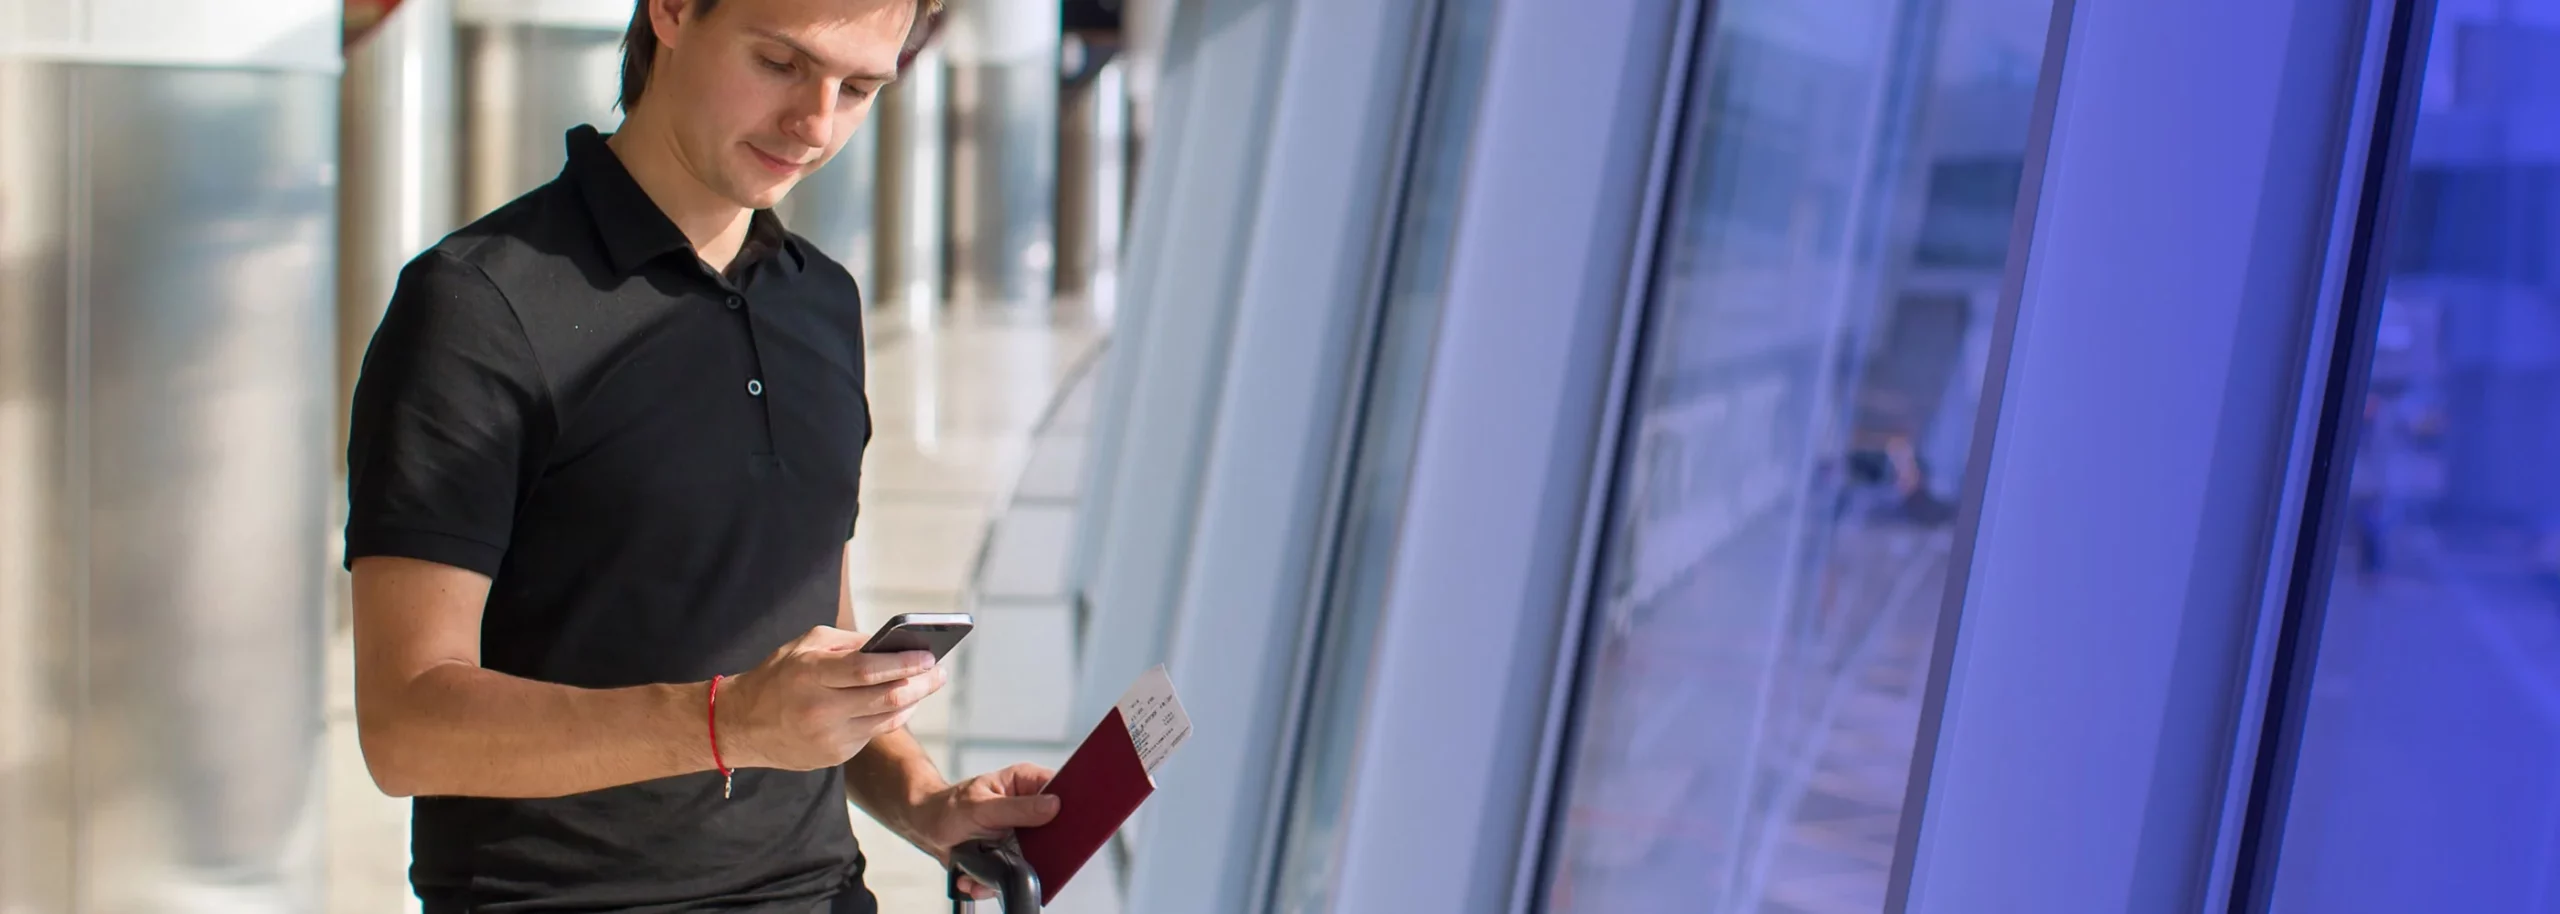 Traveler checking his hotel reservation through his cellphone at the airport